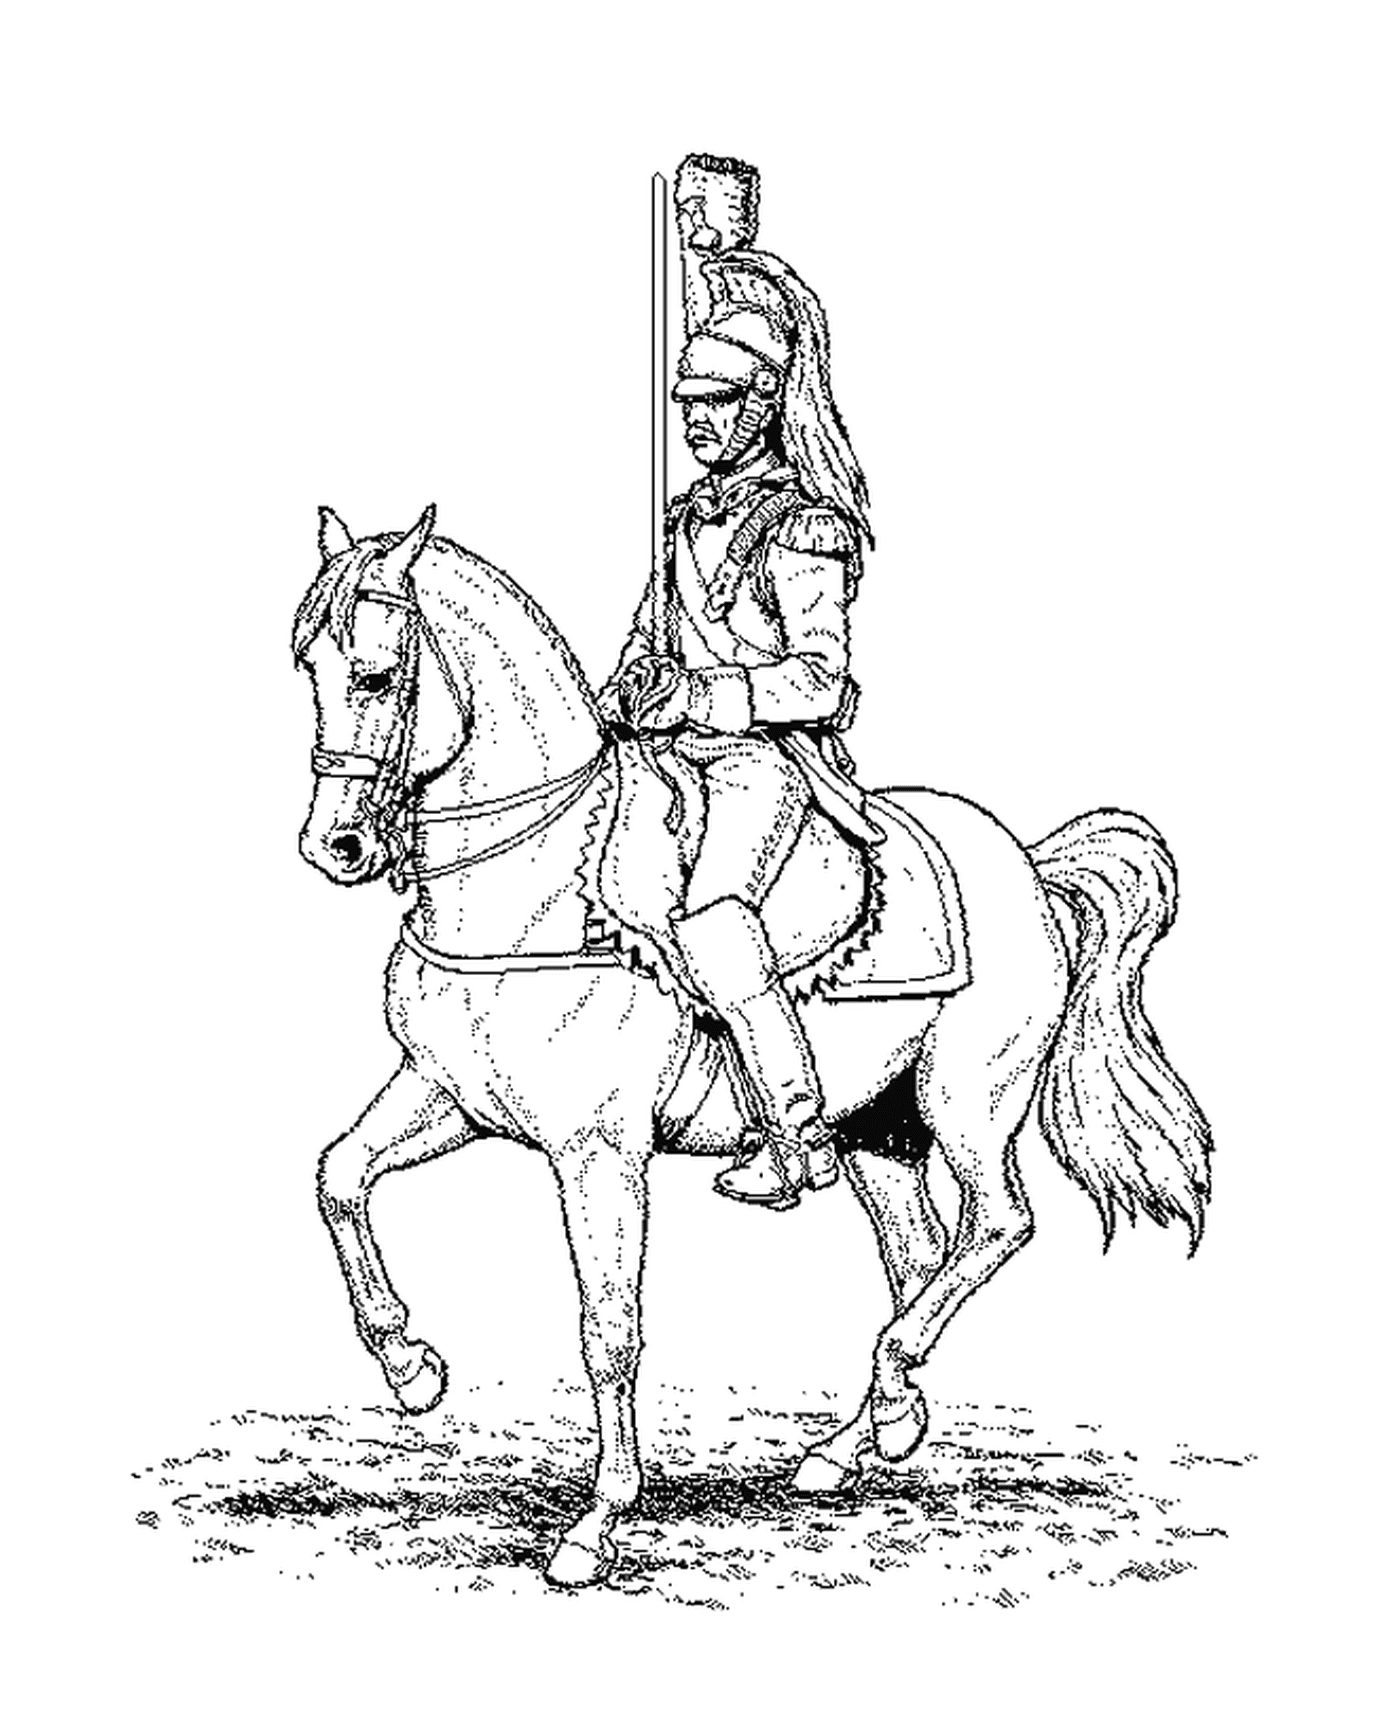  A person riding on an ancient horse 